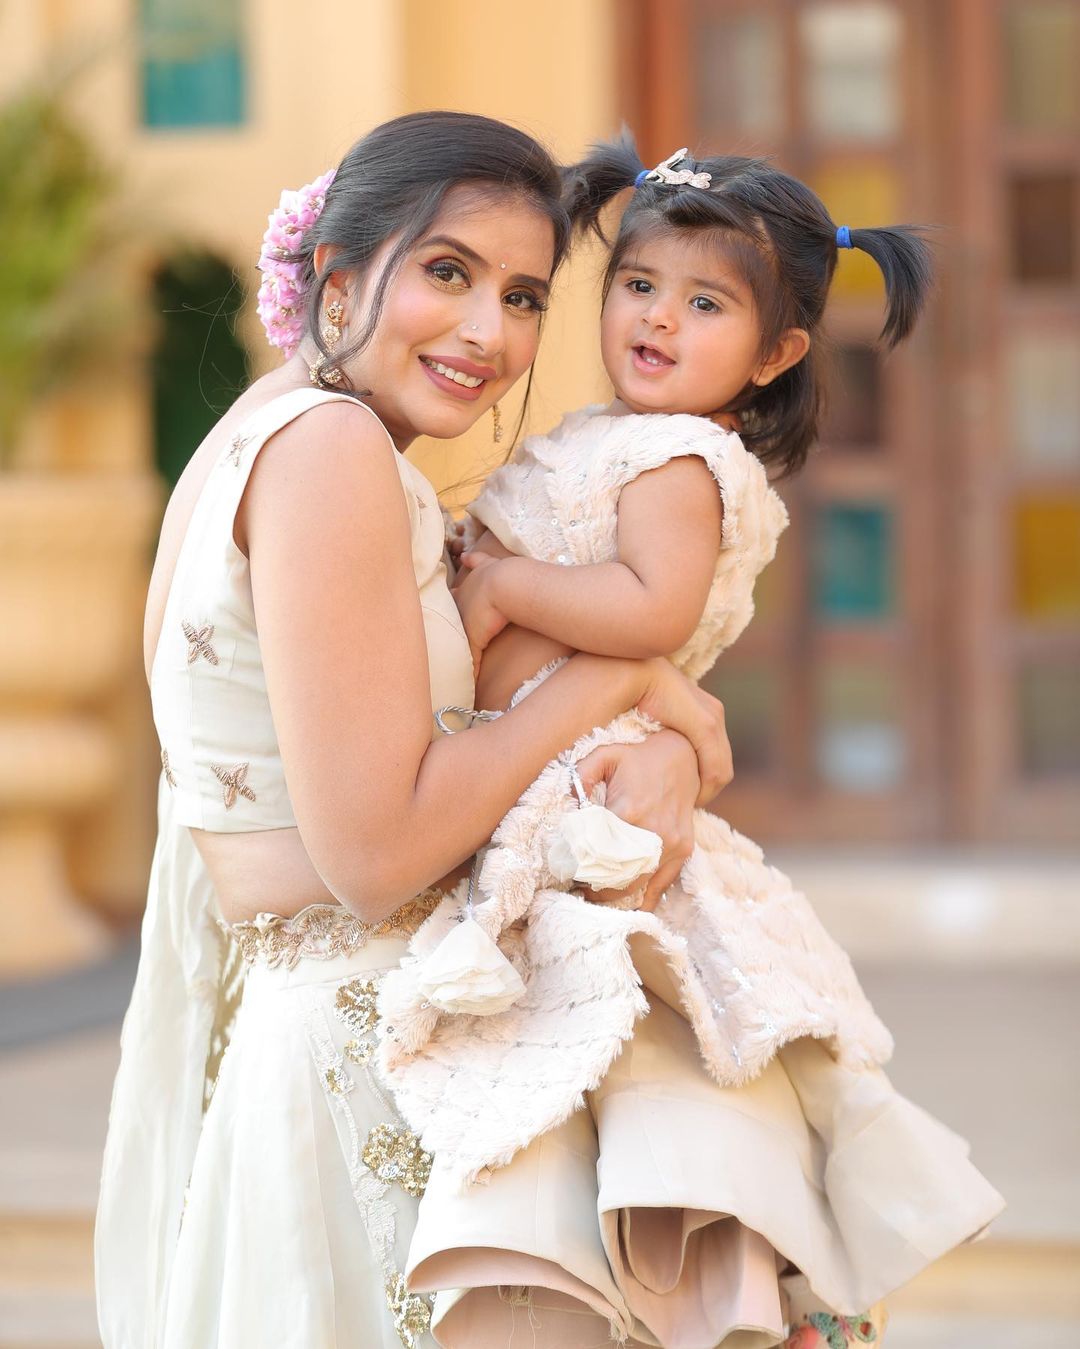 Charu Asopa Celebrates Her Little Princess Birthday; Writes, “You Are Truly The Best Thing That Has Ever Happened To Me”!